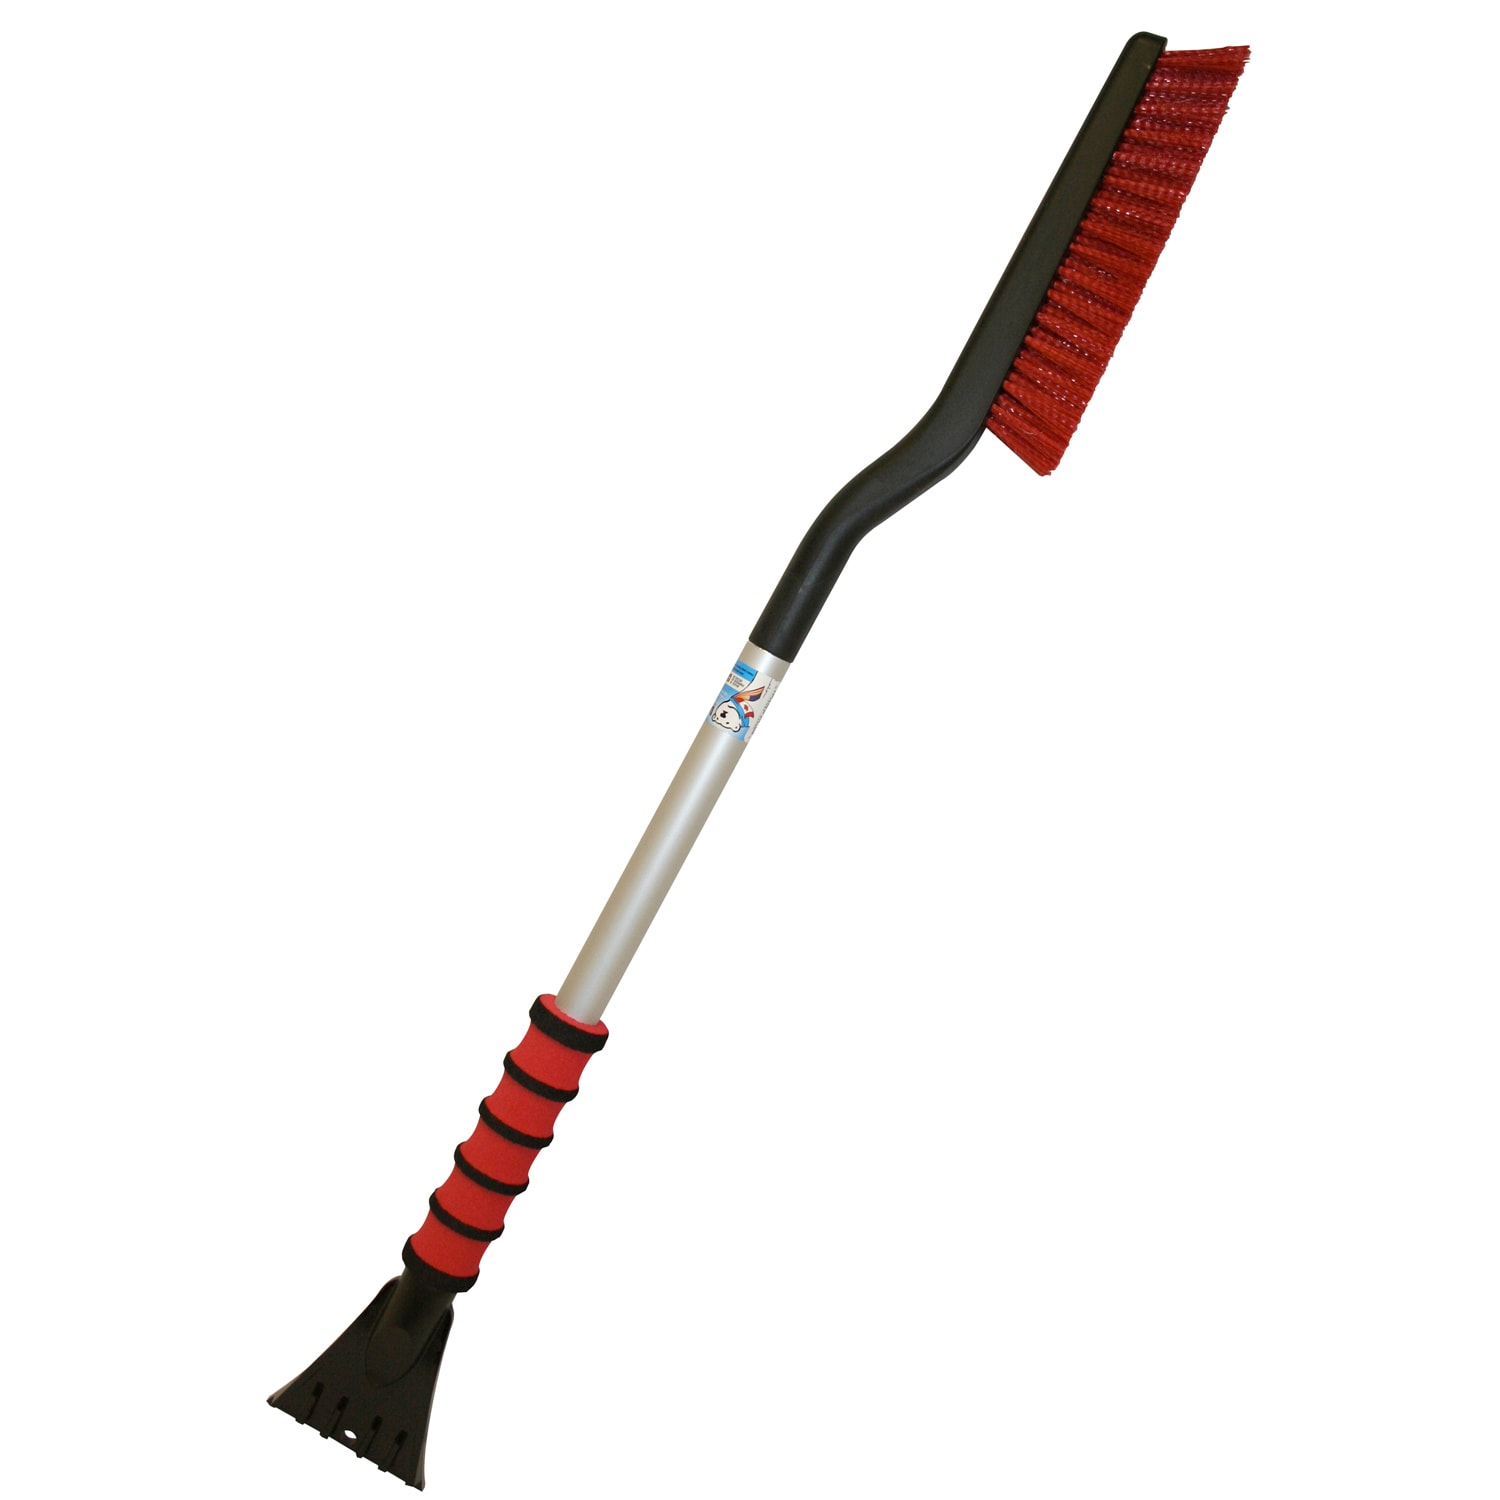 Hopkins 16511 Snow Brush, 23 Inch Overall Length: Ice Scrapers & Snow  Brushes (079976165112-1)